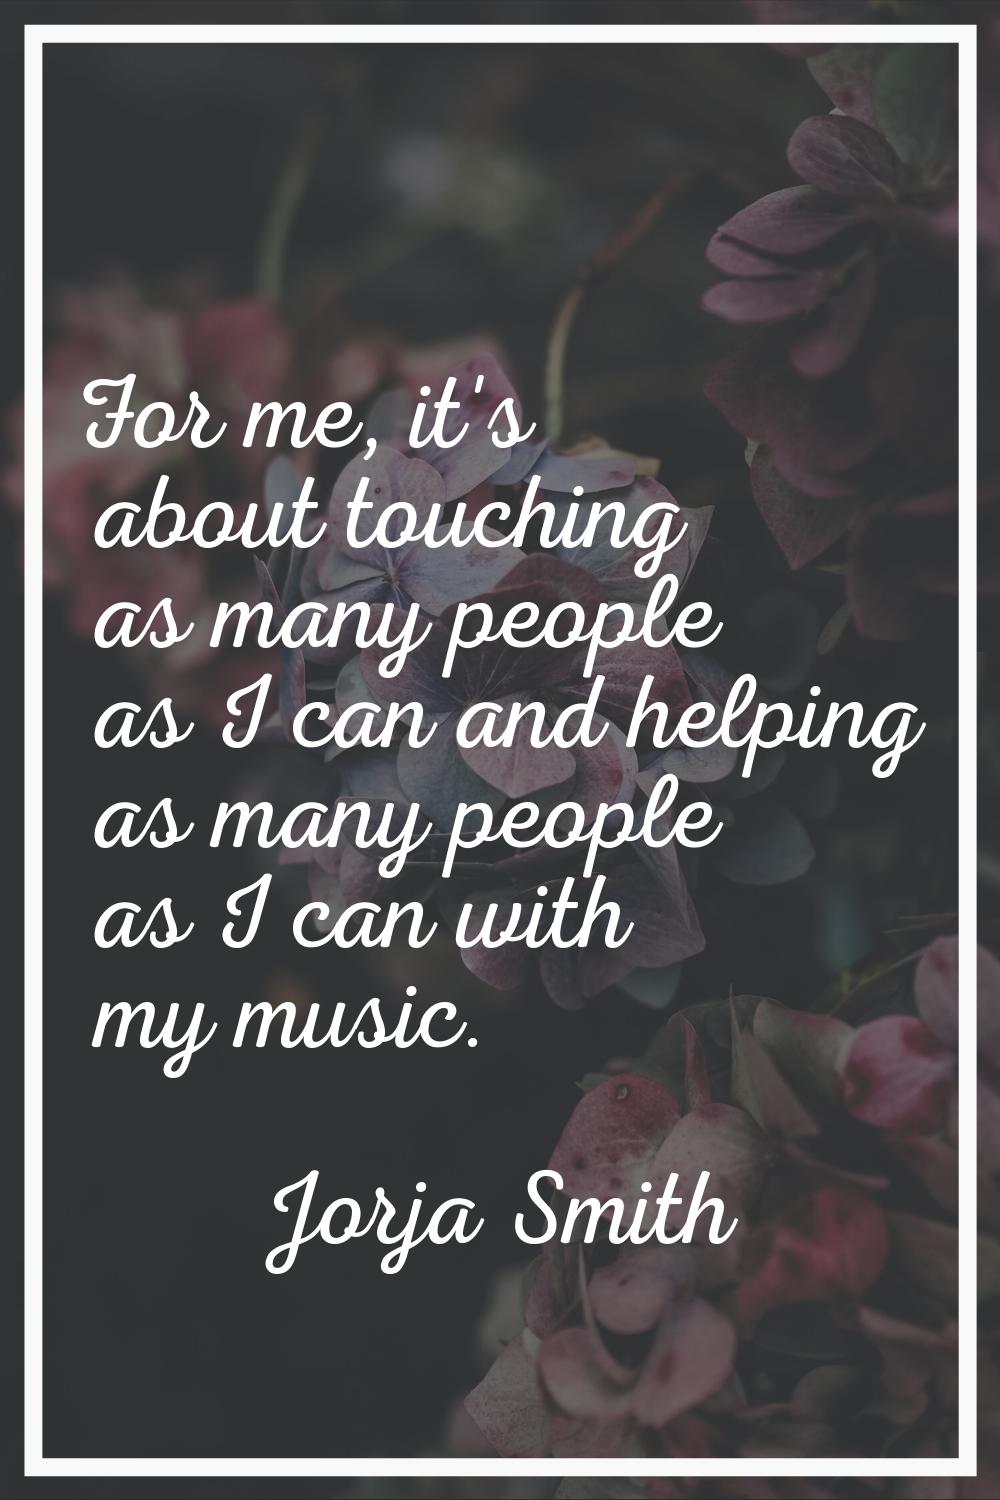 For me, it's about touching as many people as I can and helping as many people as I can with my mus